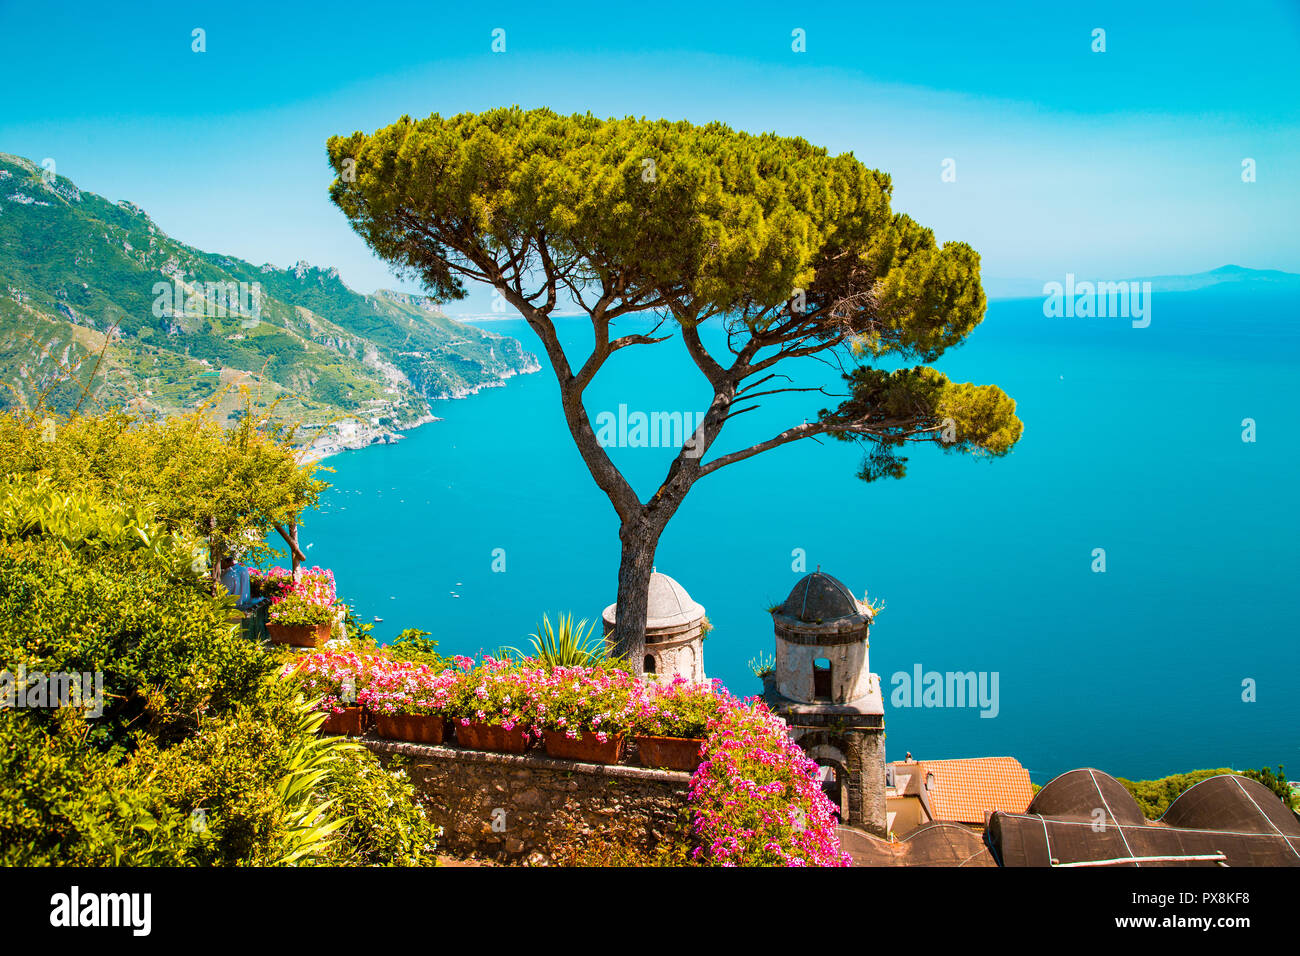 Scenic panoramic view of famous Amalfi Coast with Gulf of Salerno from Villa Rufolo gardens in Ravello, Campania, Italy Stock Photo